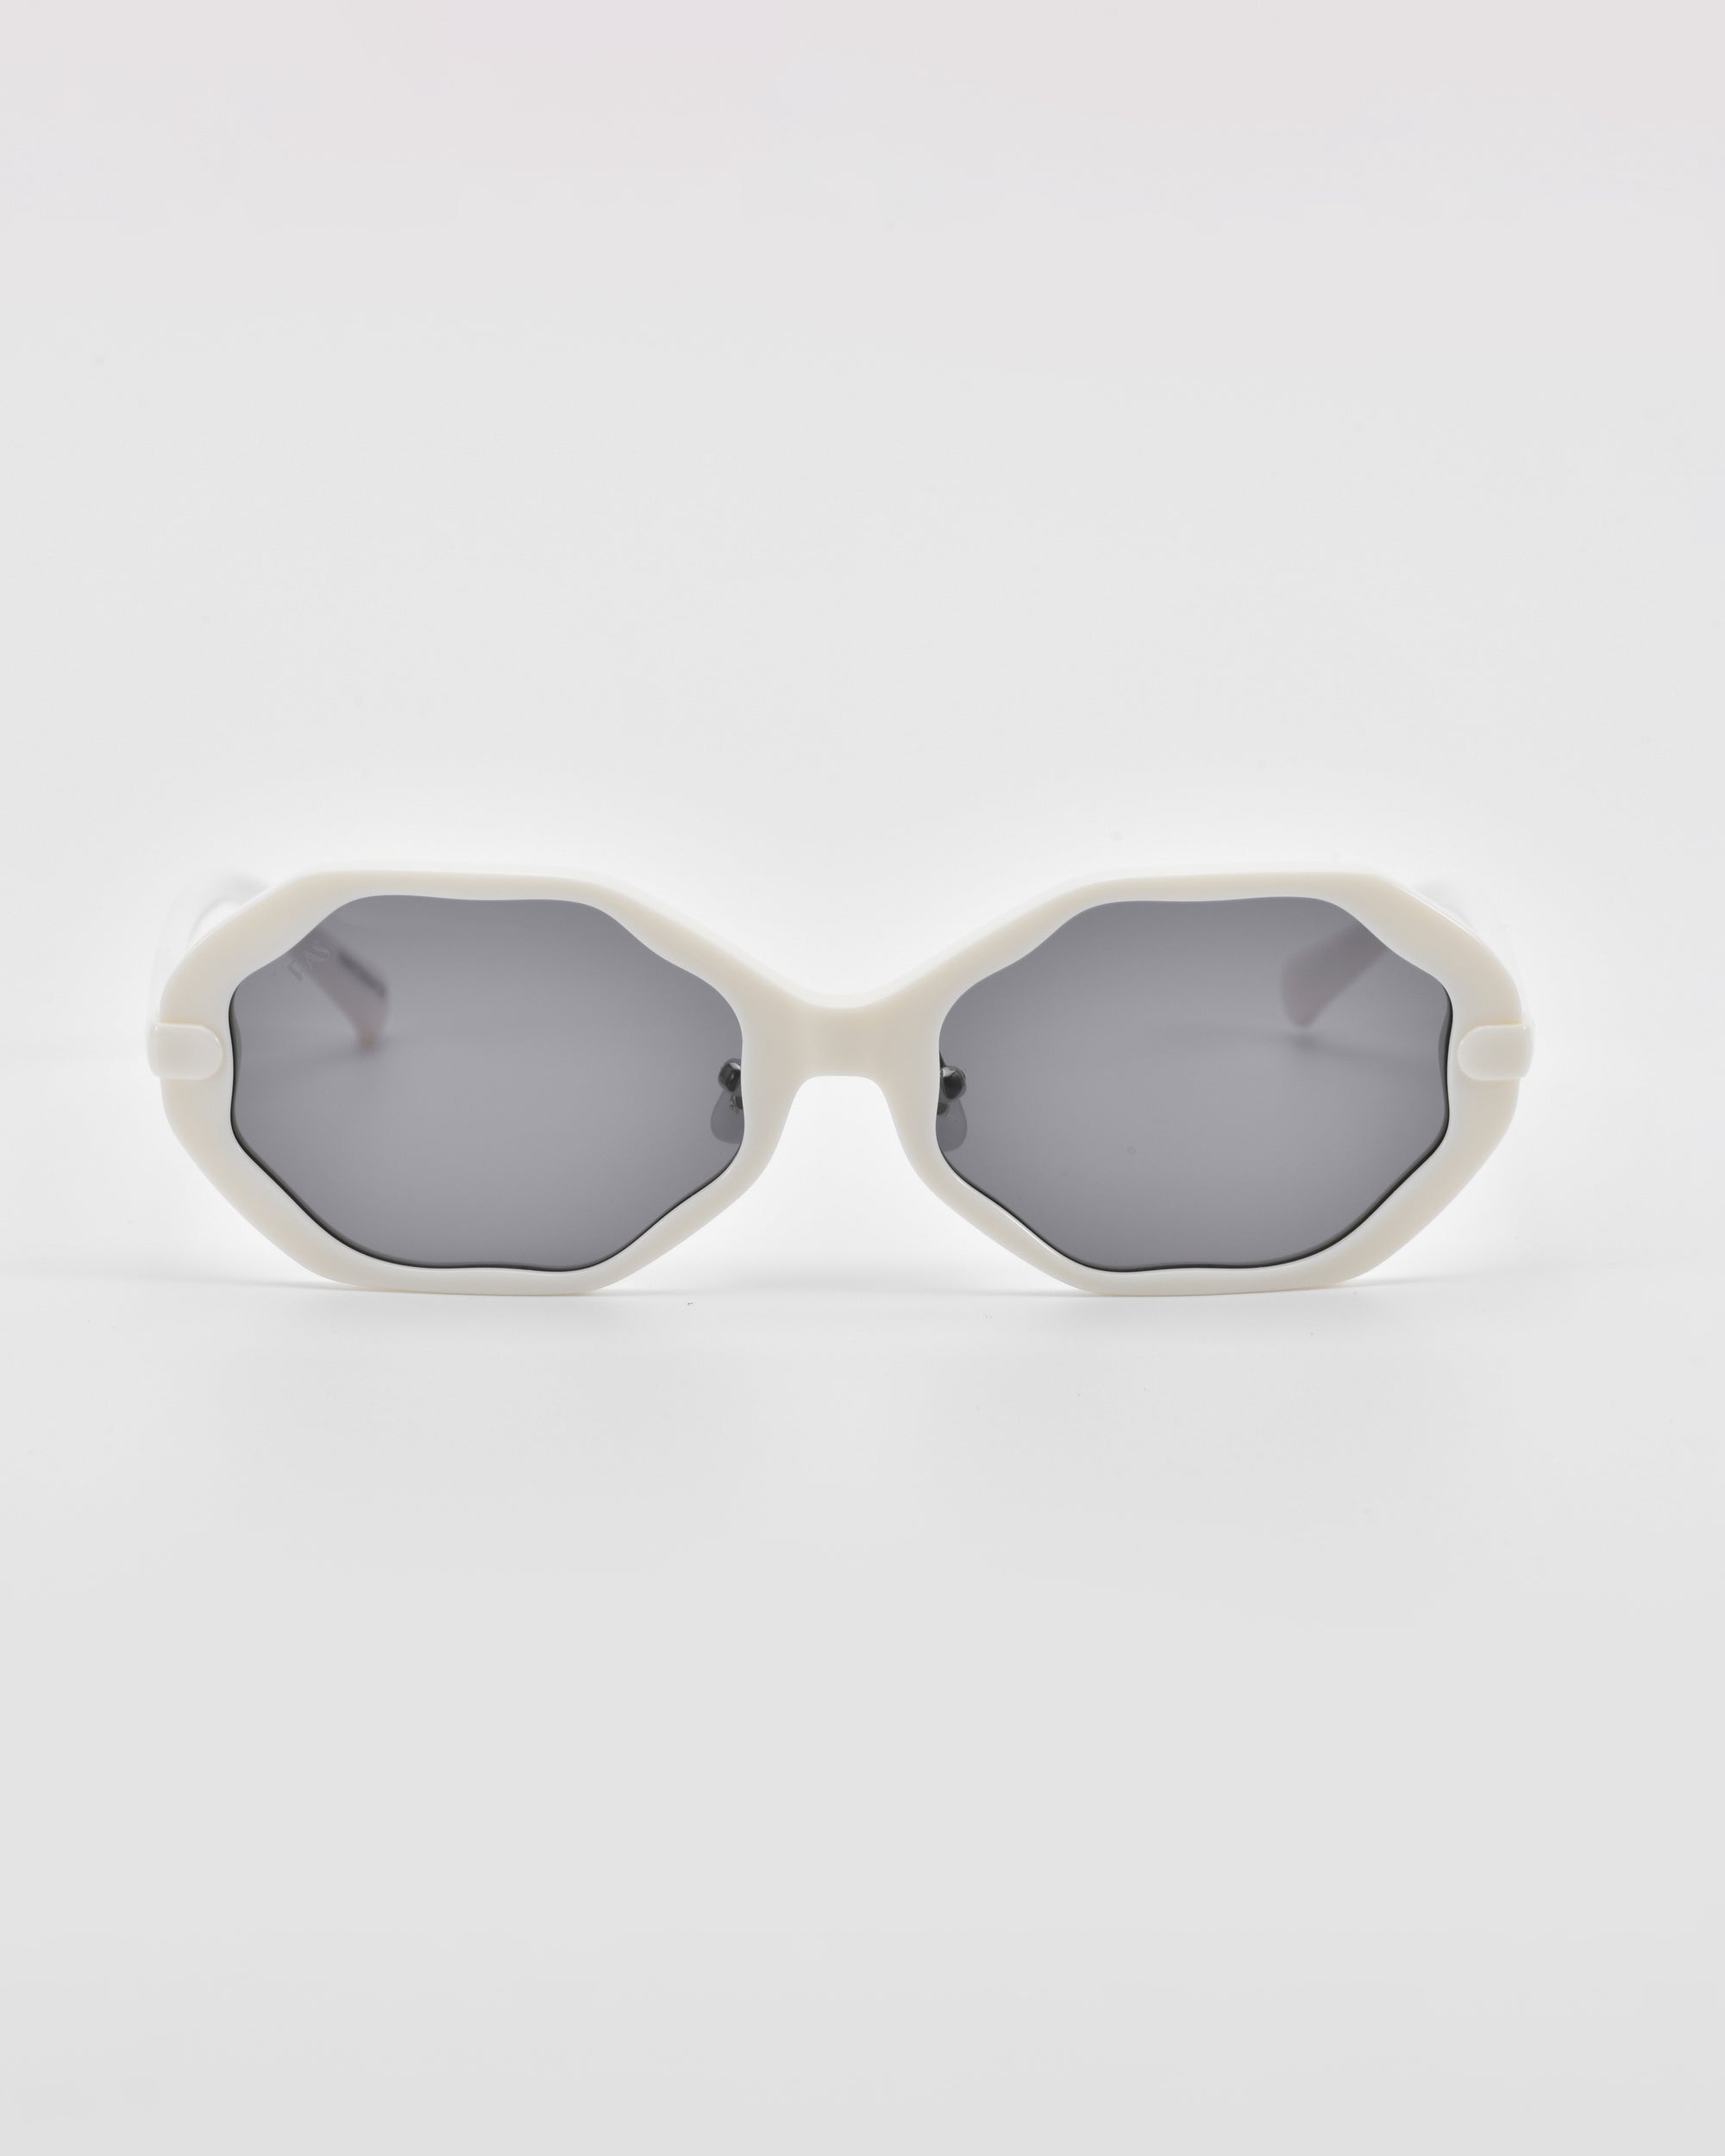 White, geometric-framed For Art's Sake® Lotus sunglasses with dark gray lenses, featuring an angular silhouette and shown against a plain white background.